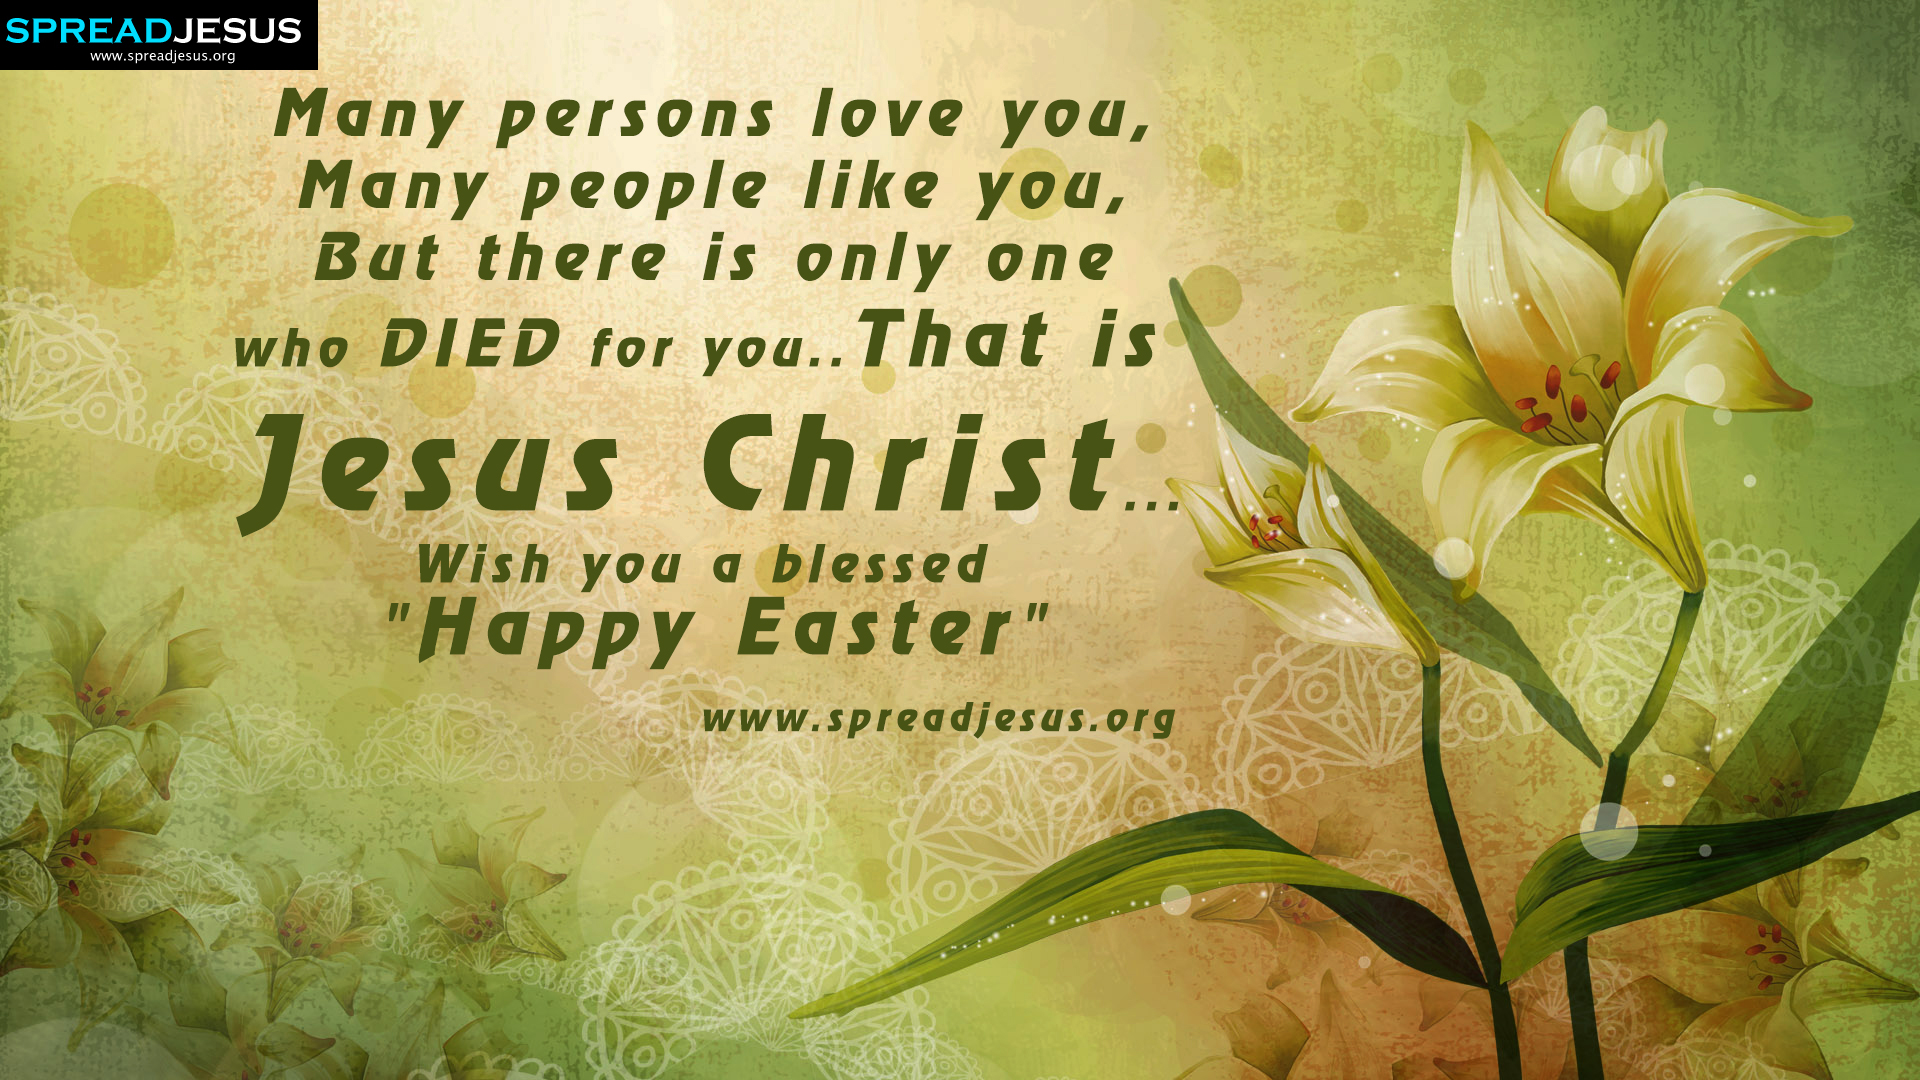 Wish You A Blessed Happy Easter Greetings HD Wallpaper Many